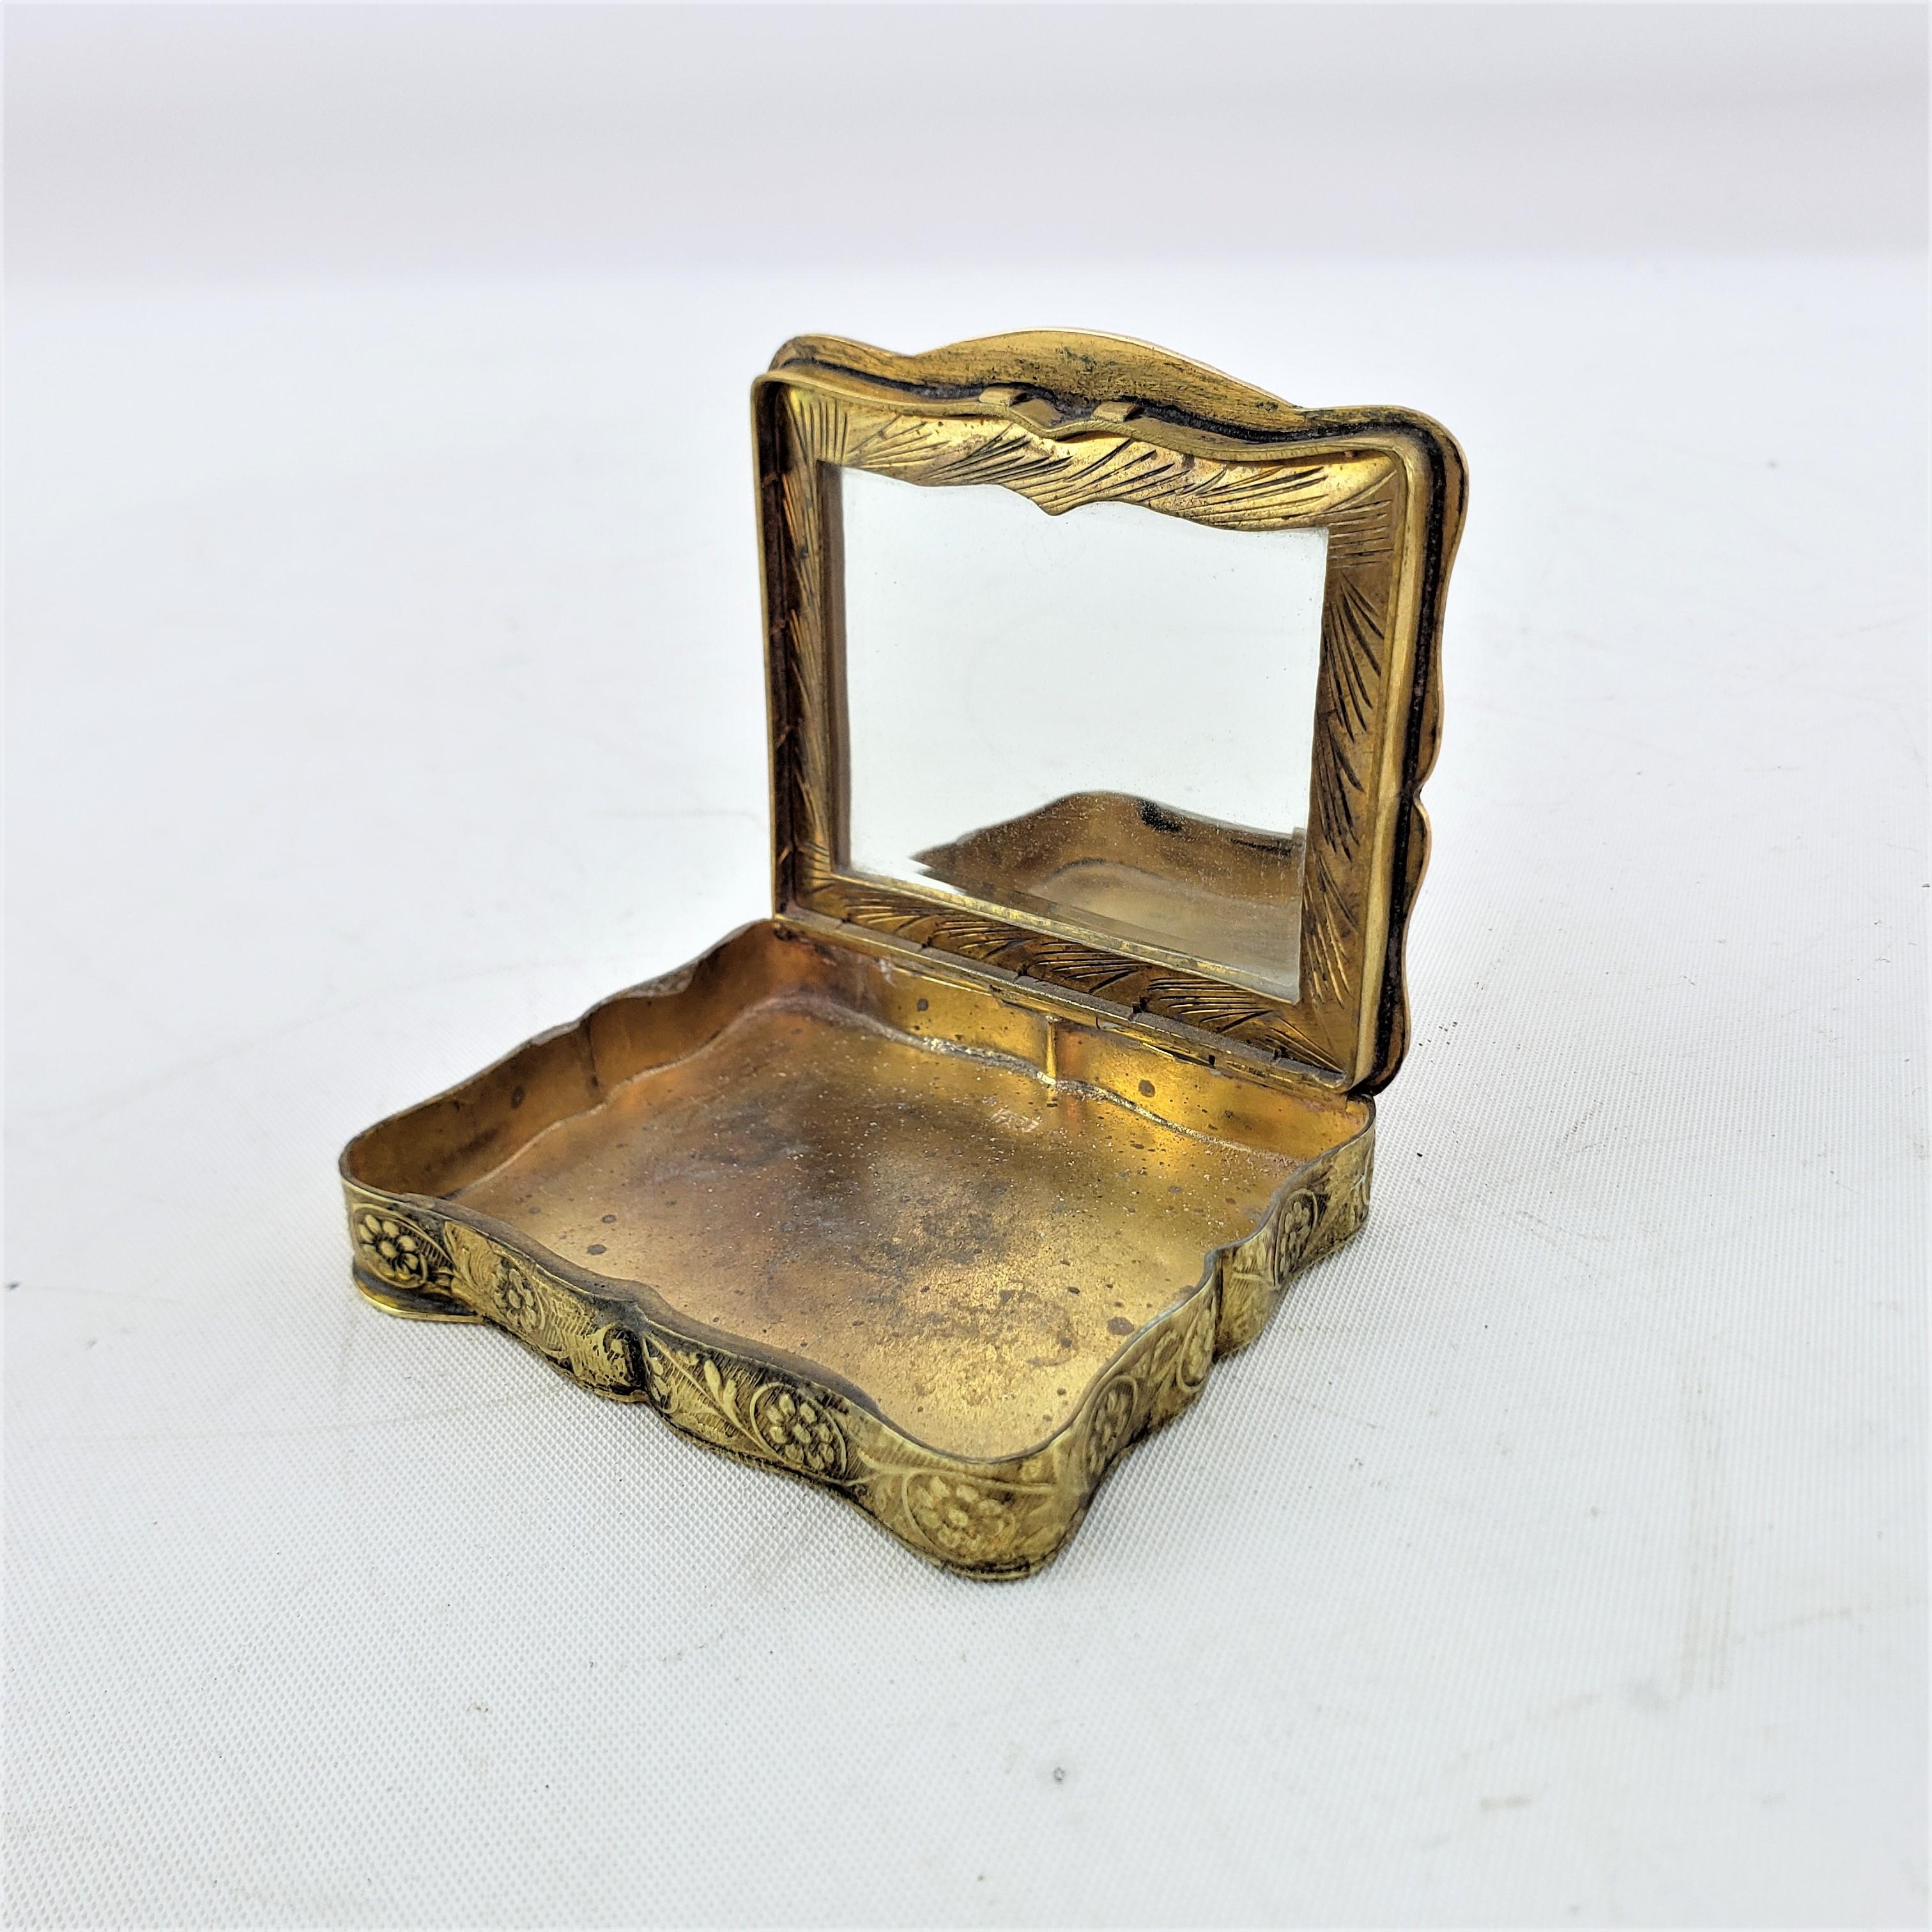 Antique Gilt Copper & Enamel Ladies Compac with Hand Painted Portrait In Good Condition For Sale In Hamilton, Ontario